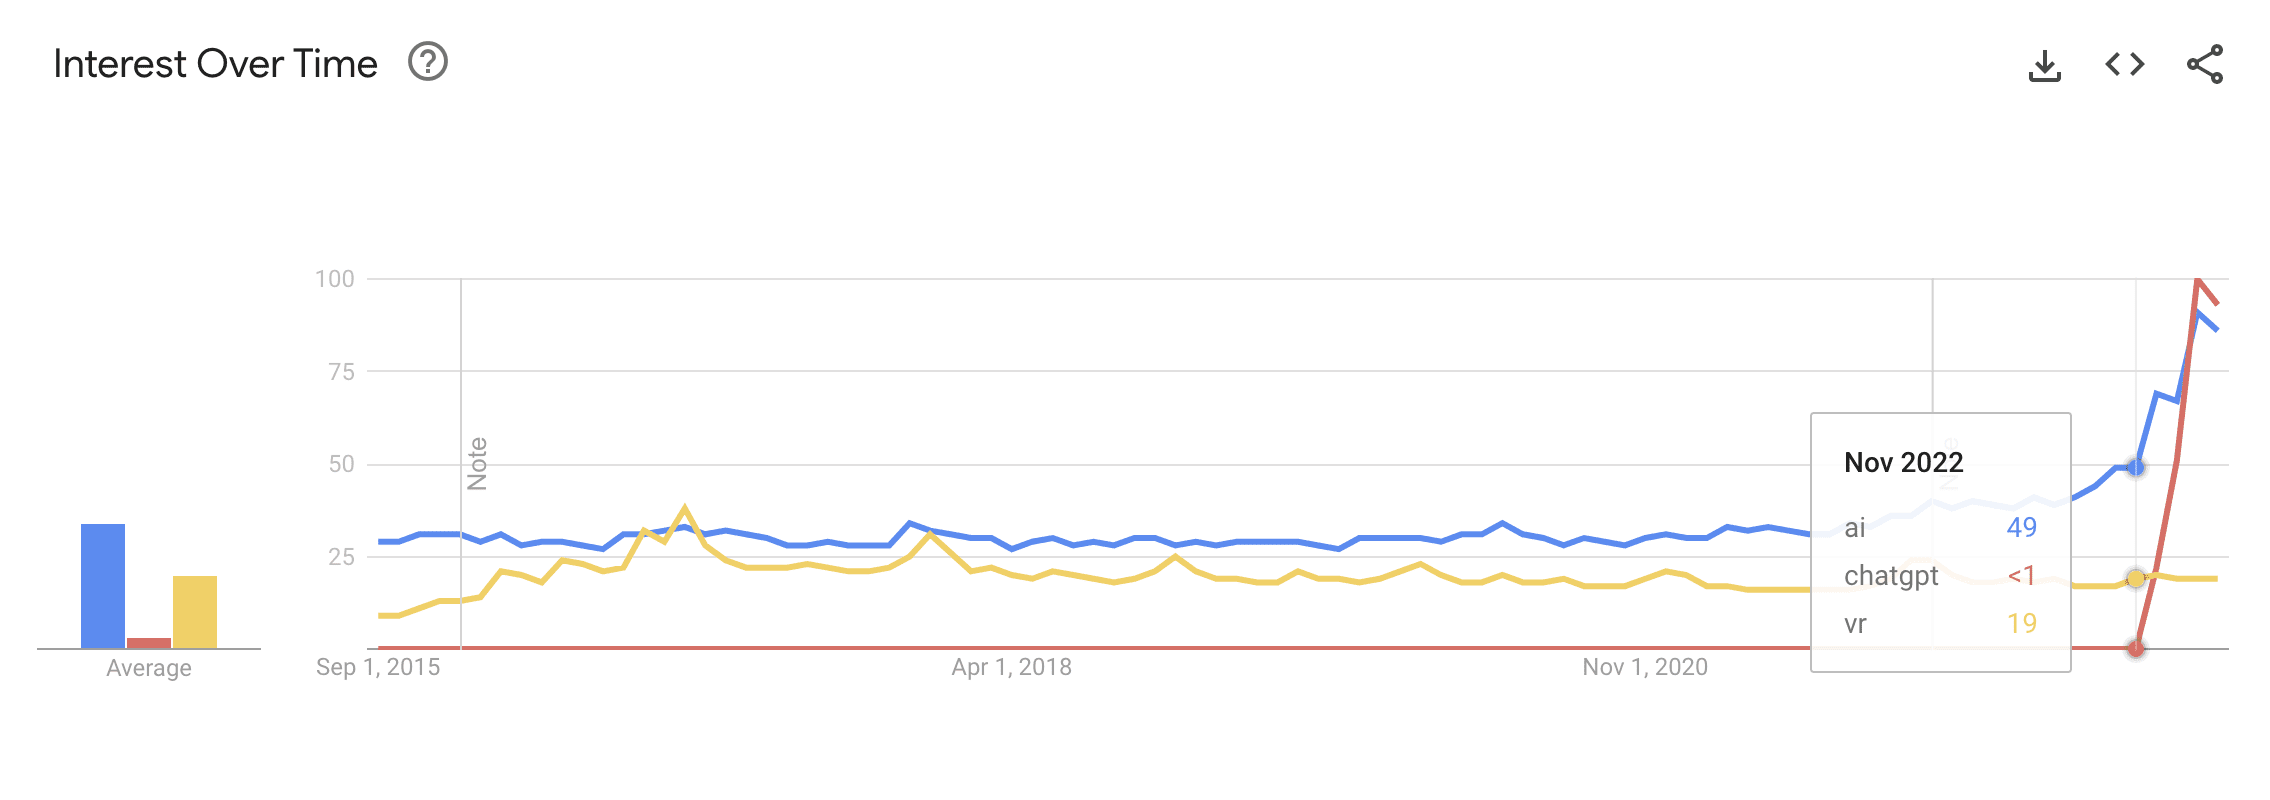 Google Trends showing AI VR and ChatGPT